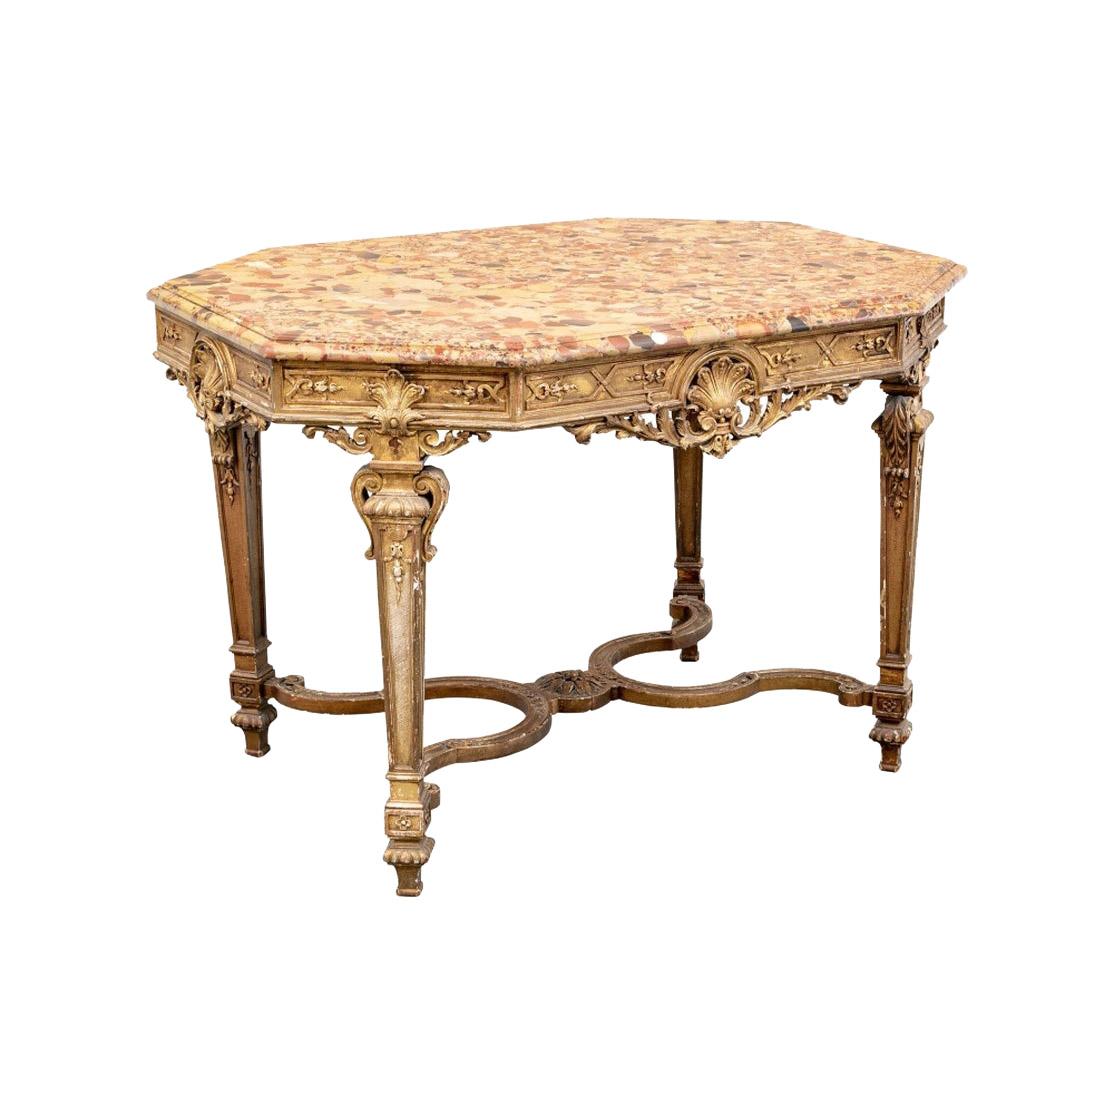 Very Fine Antique Neoclassical Gilt Marble Top Center Table